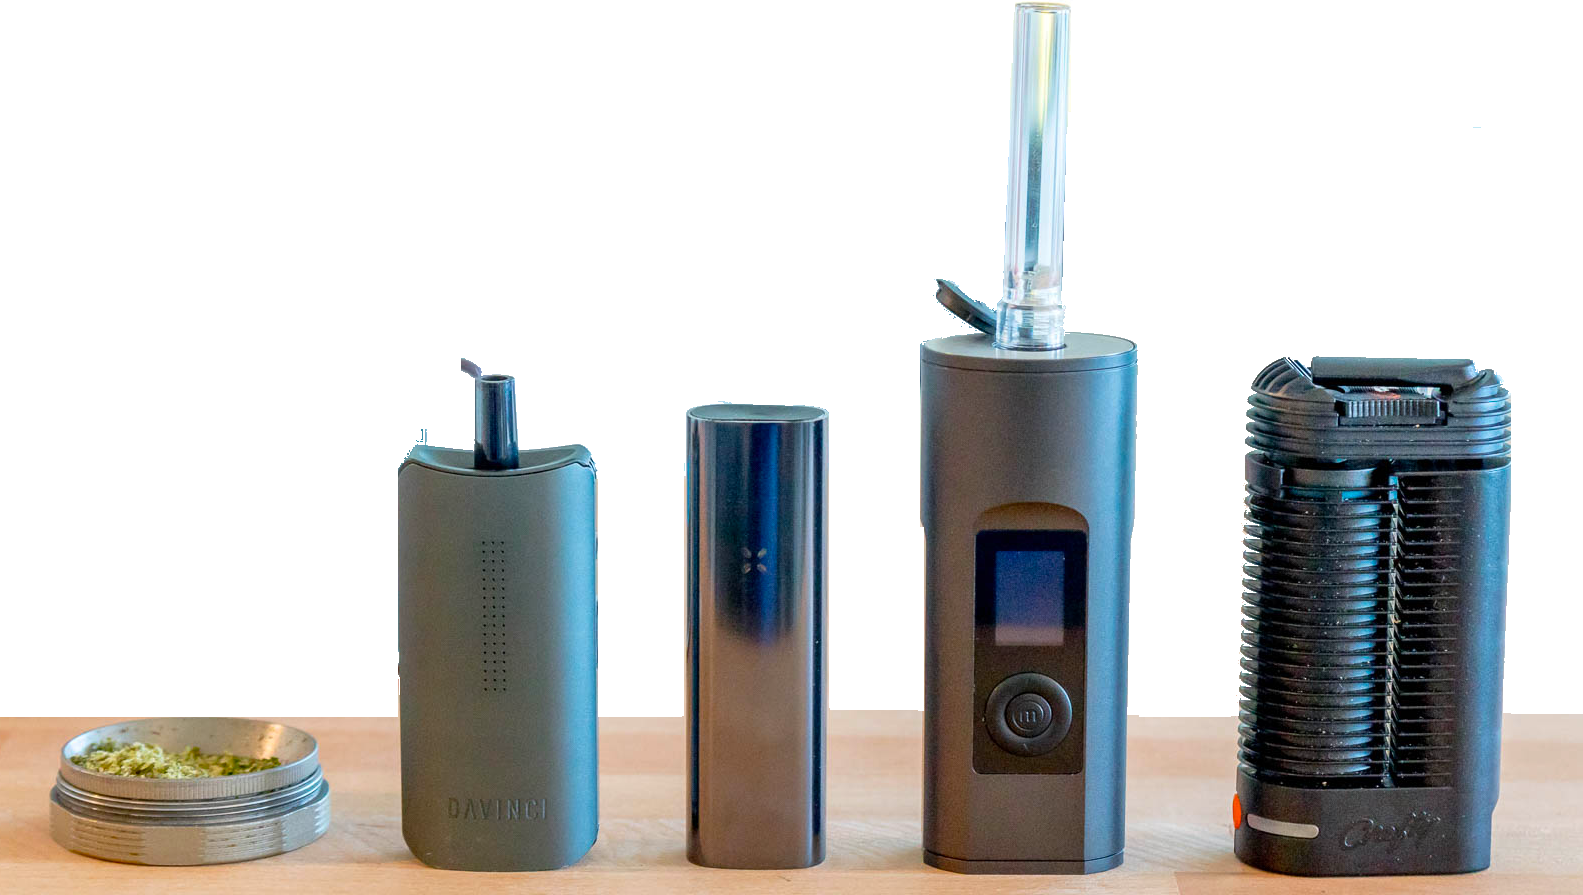 Vapourizer Image with Solo 2 Arizer, Pax, Crafty and Da Vinchi in one image